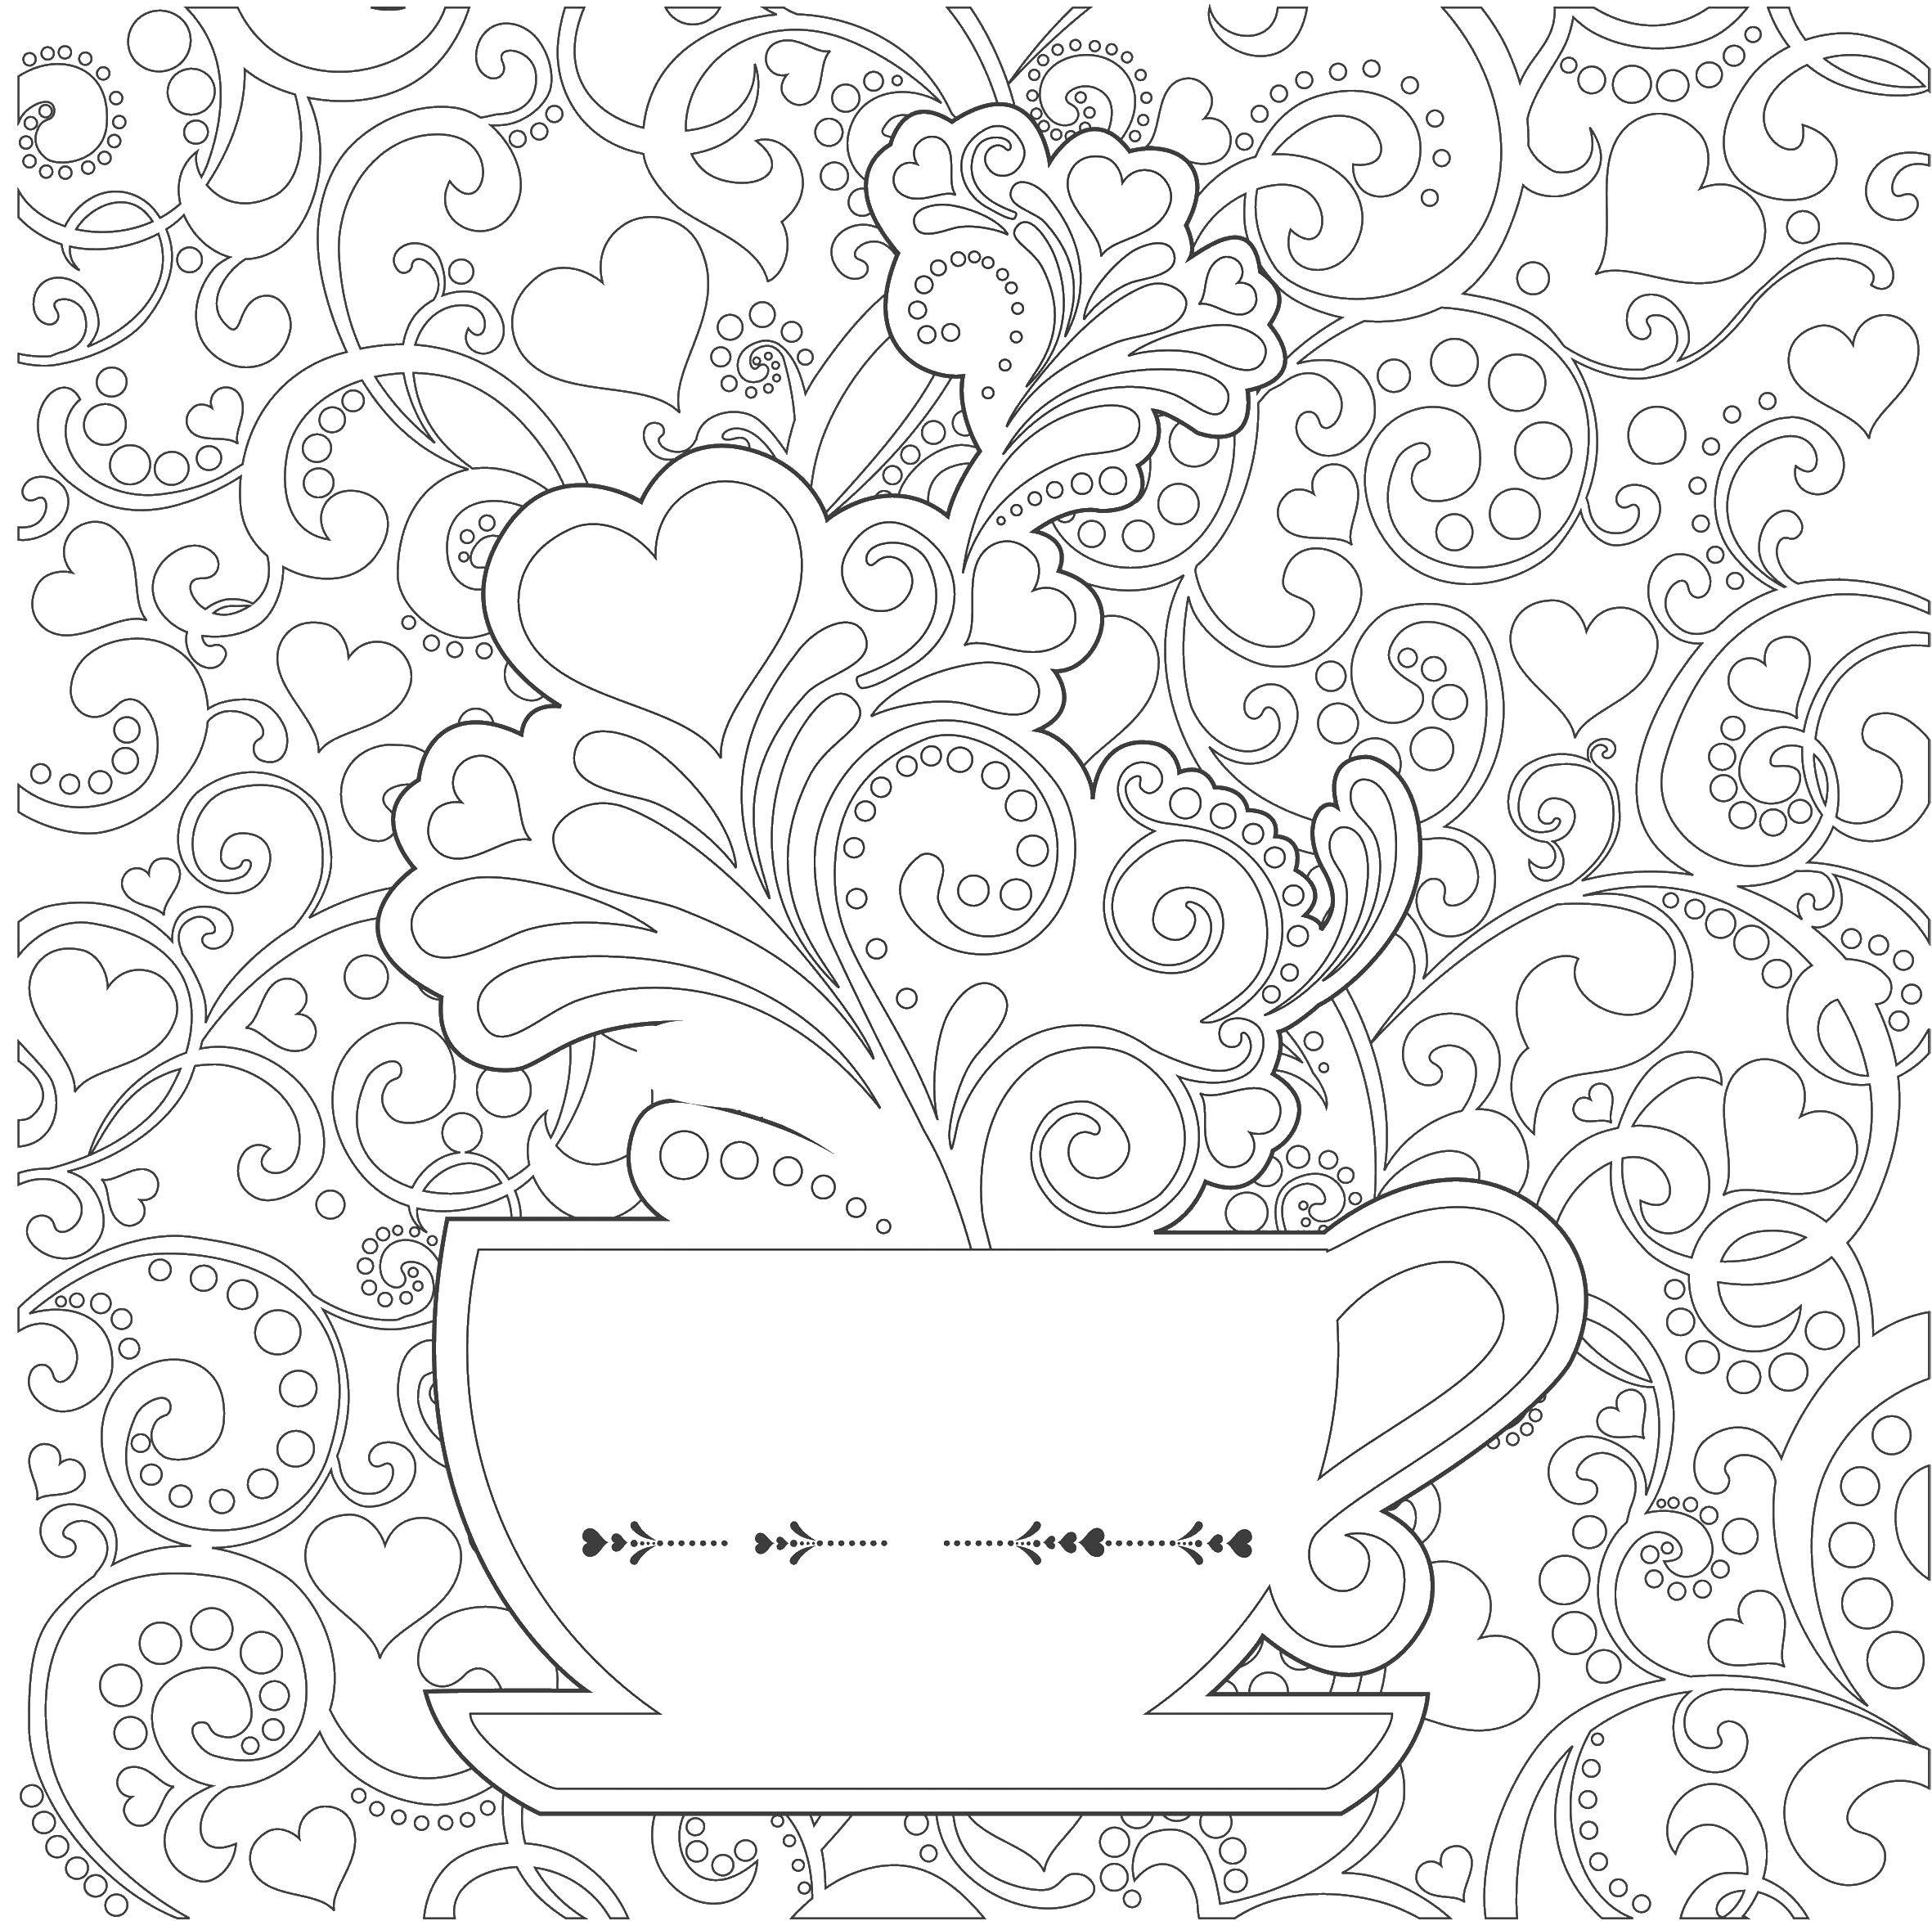 Coloring Pattern flowers. Category patterns. Tags:  pattern .